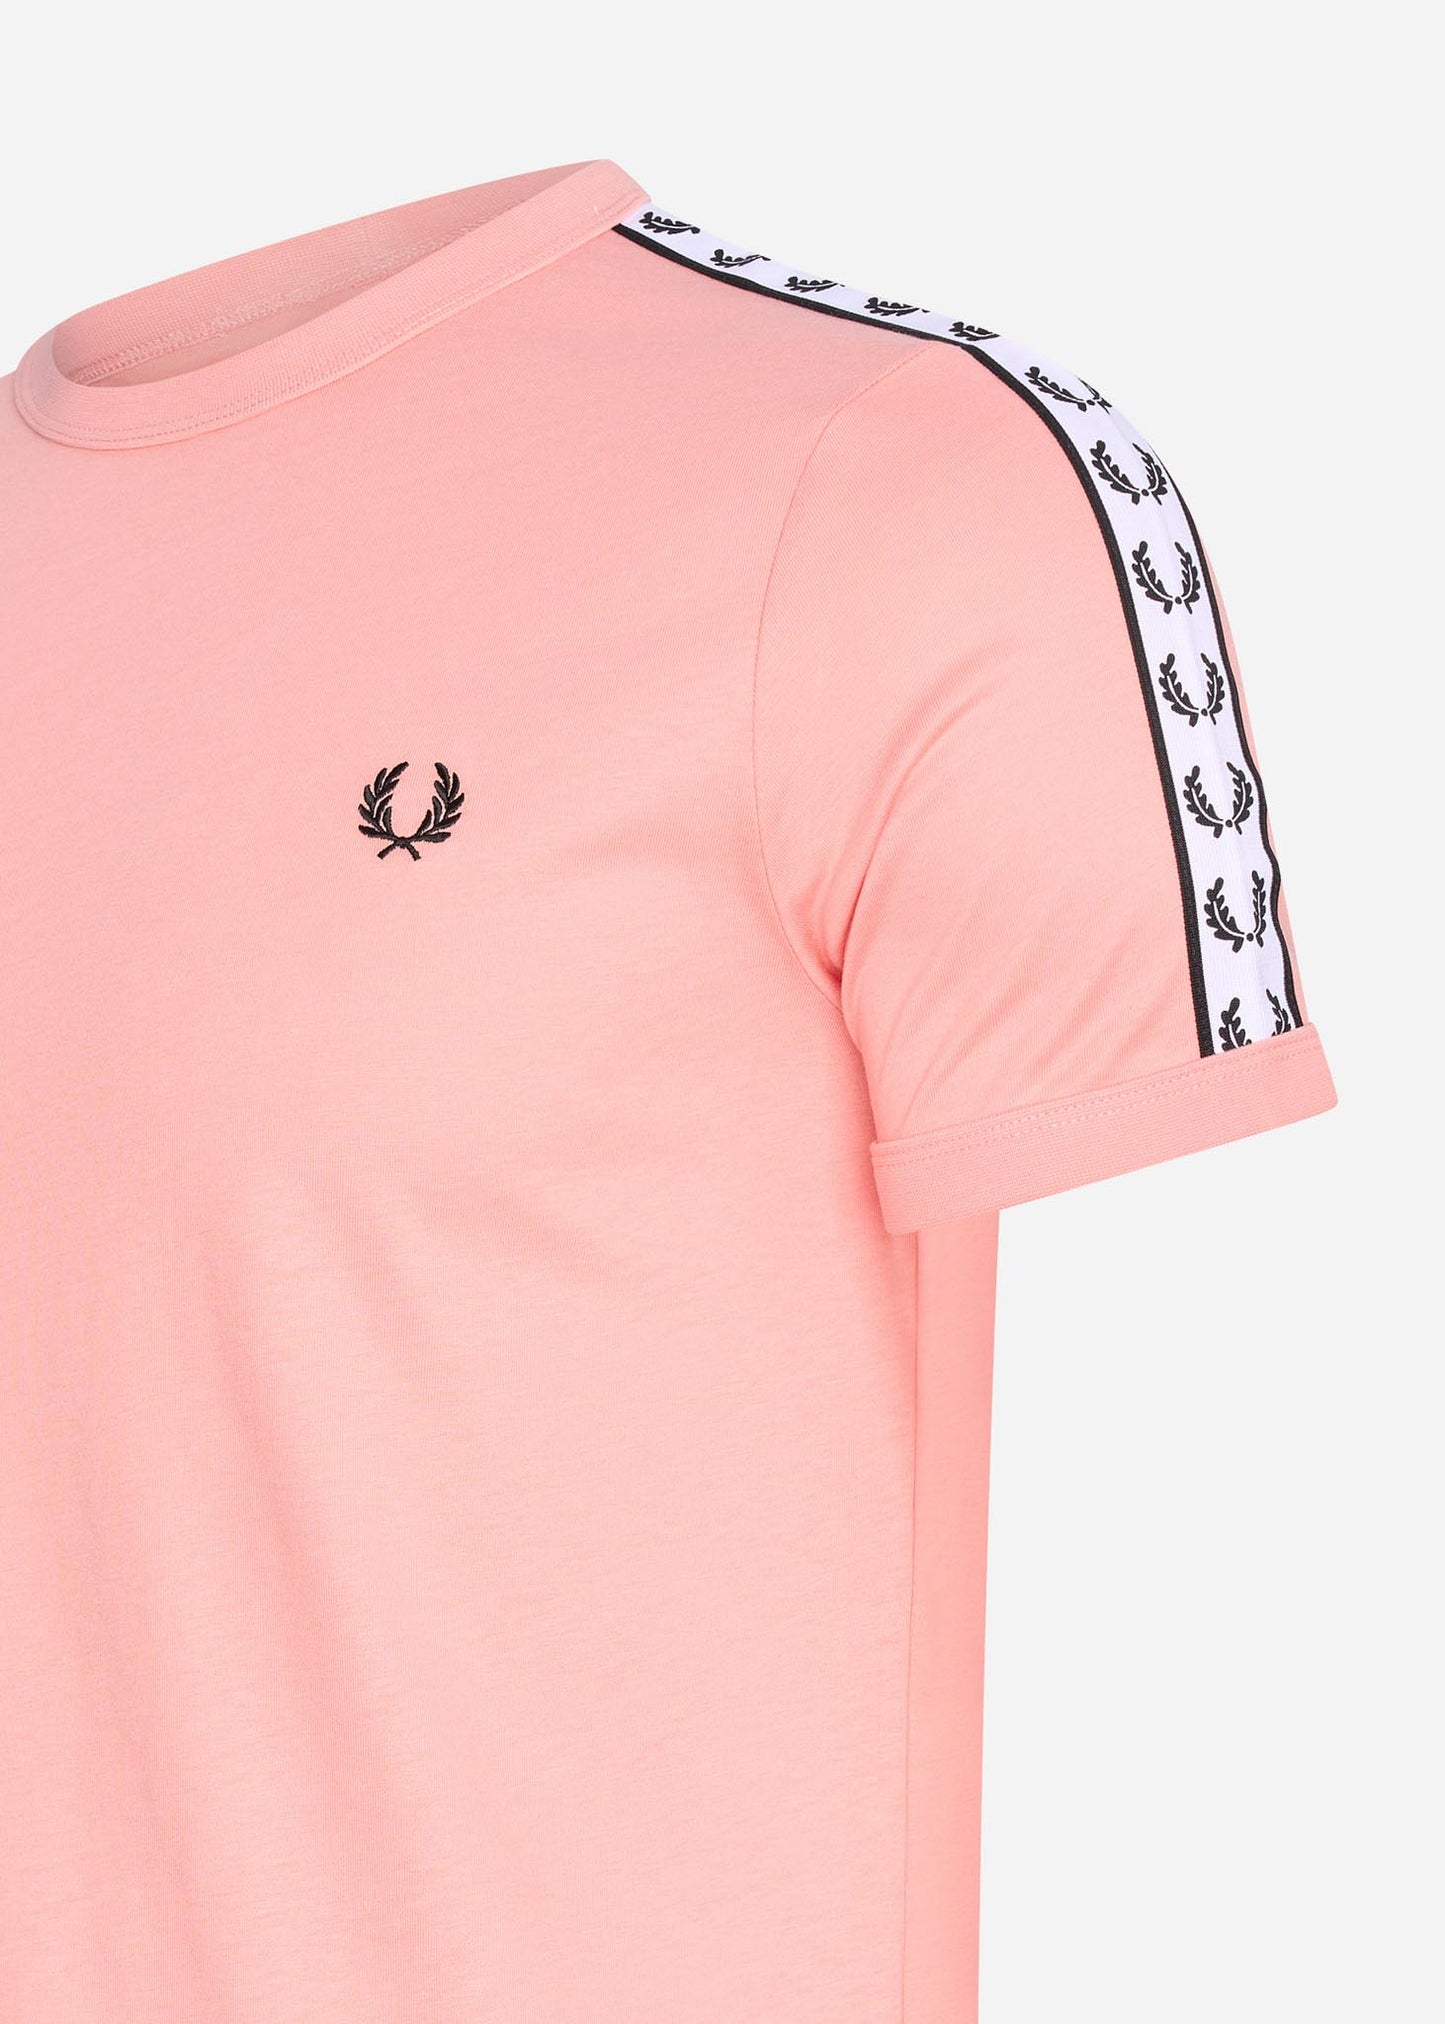 Taped ringer t-shirt - pink peach - Fred Perry